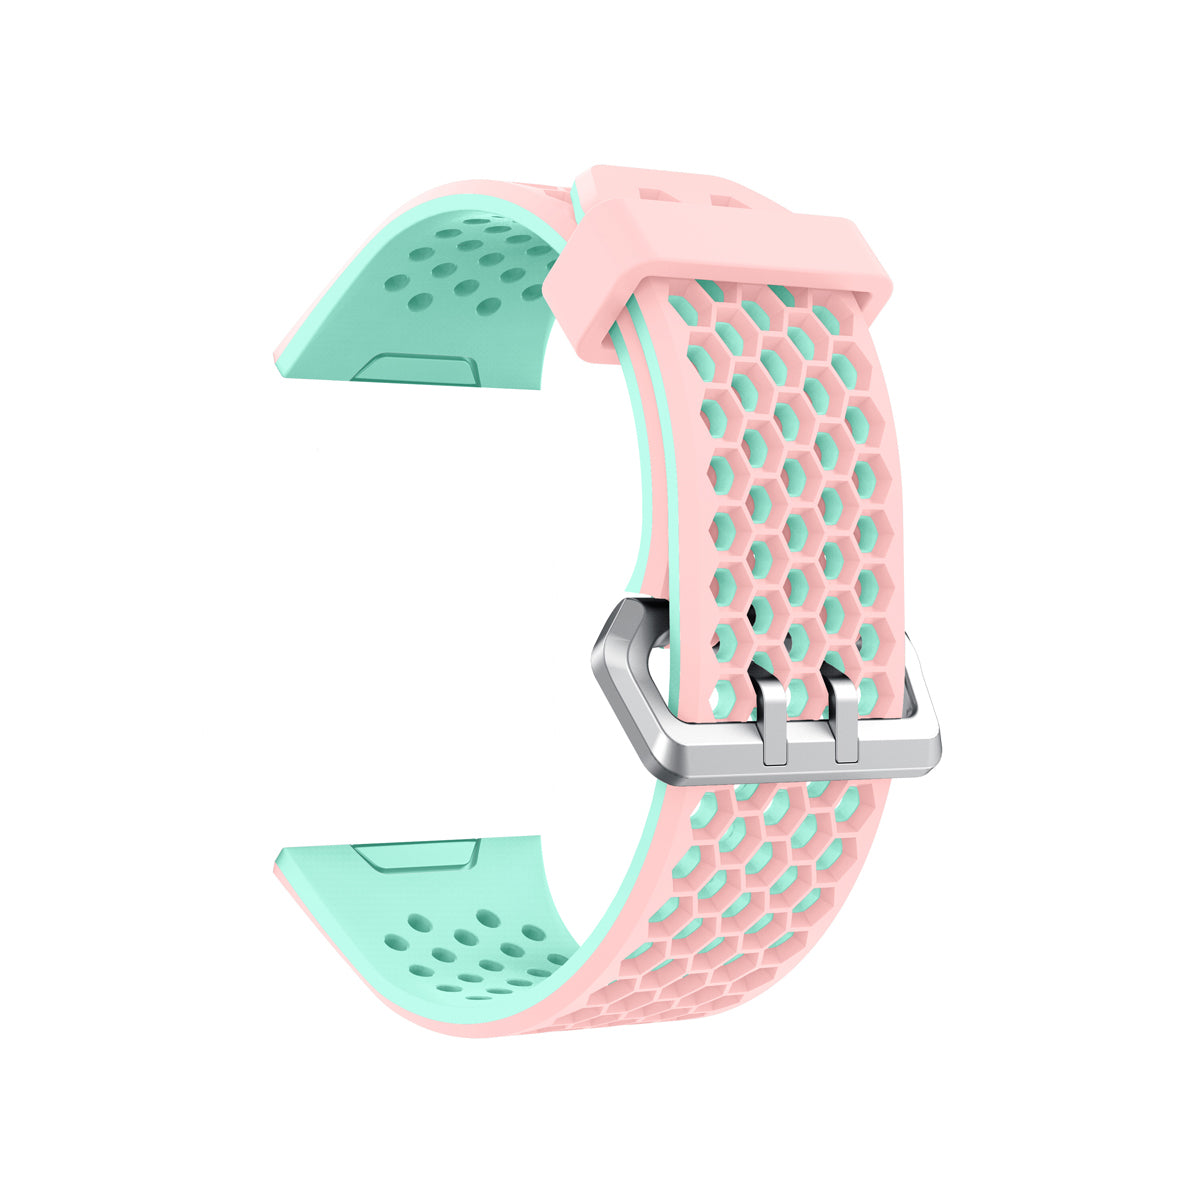 Airvent Fitbit Ionic Sports Band Replacement Strap Small Pink + Teal Vents 